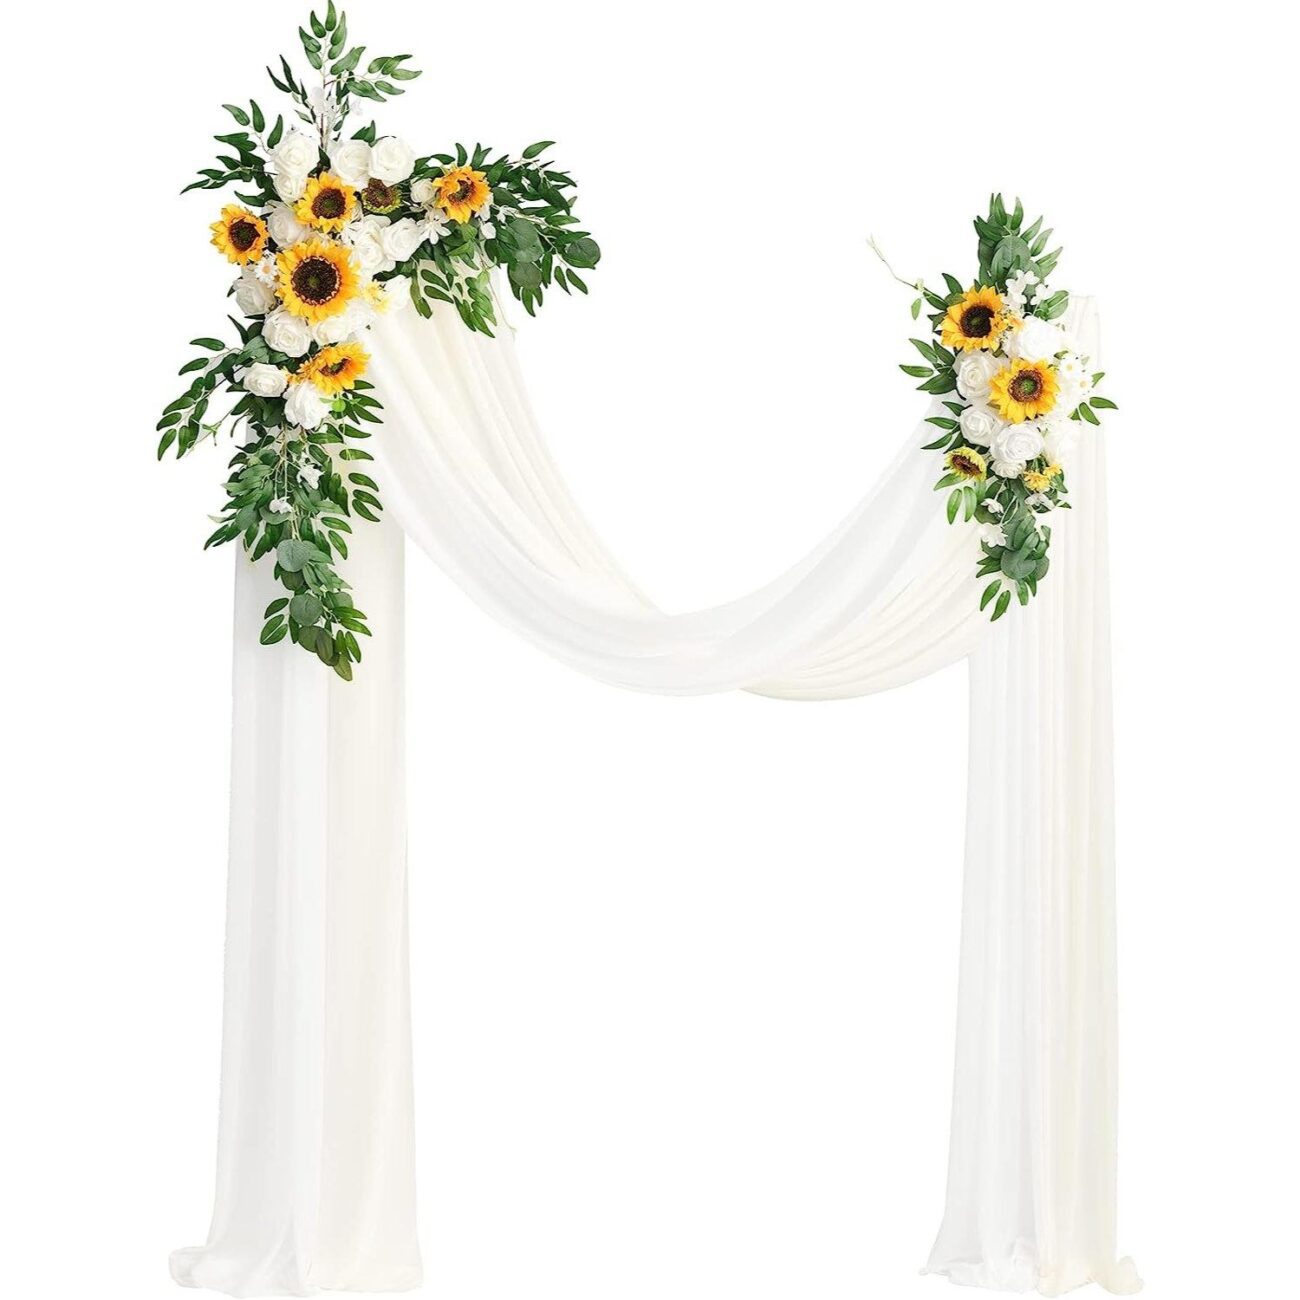 Sunflower Wedding Arch Flowers with Drapes Kit (Pack of 4) - 2pcs Artificial Flower Arrangement with 2pcs Drapes